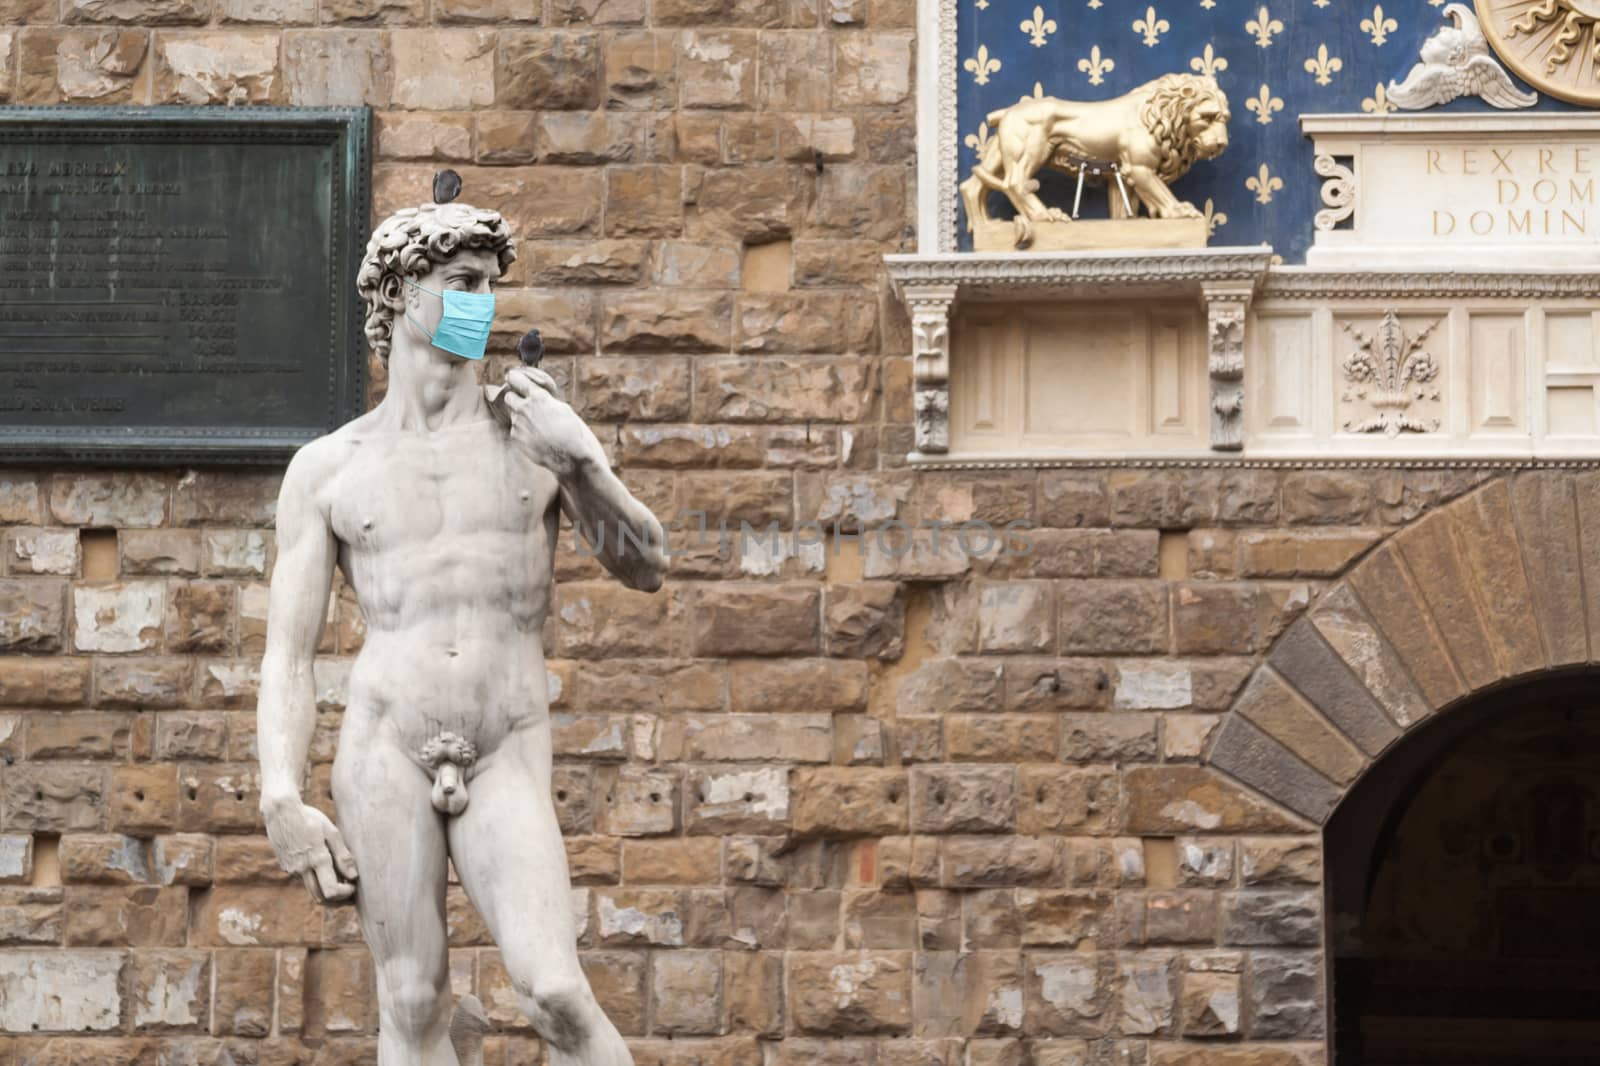 The Statue Of David in the Piazza della Signoria In Italy Wearin by Feverpitched